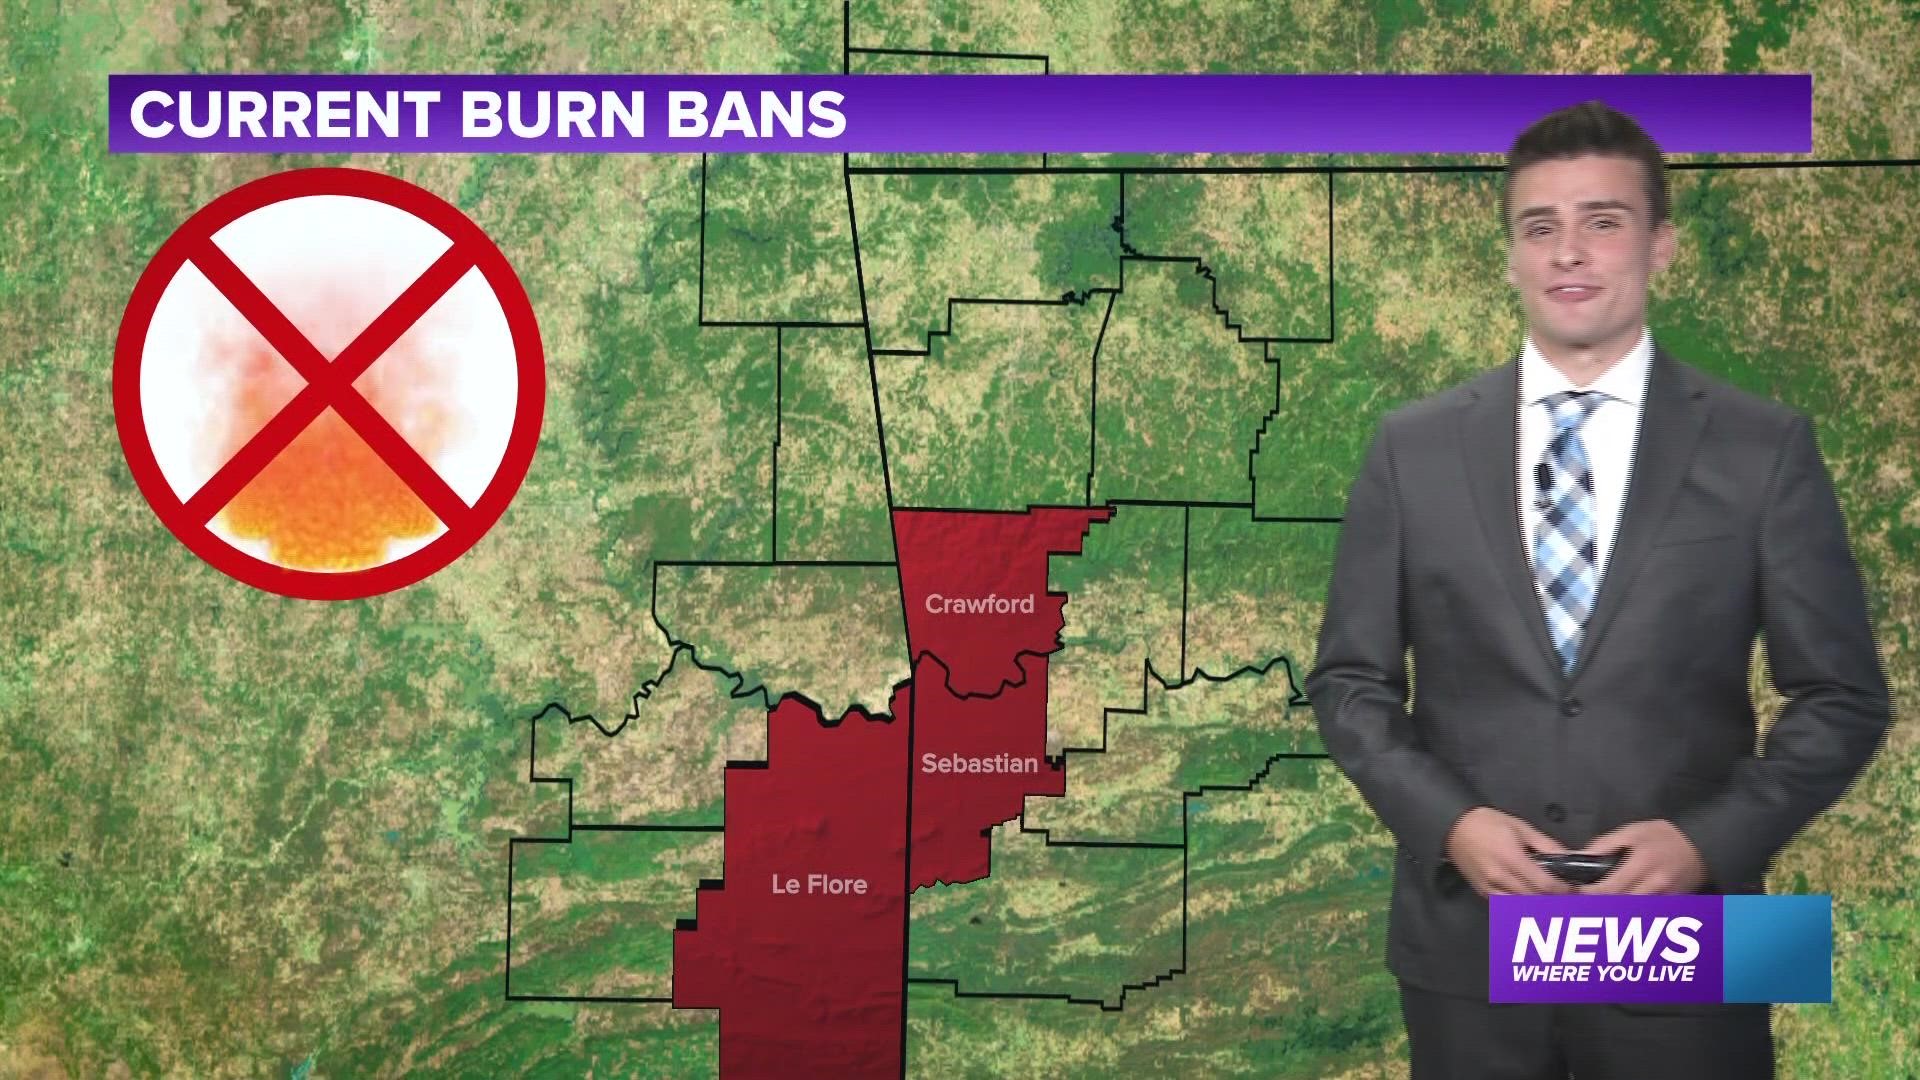 Conditions are dry across the southern Plains, resulting in a few burn bans being issued across the River Valley.